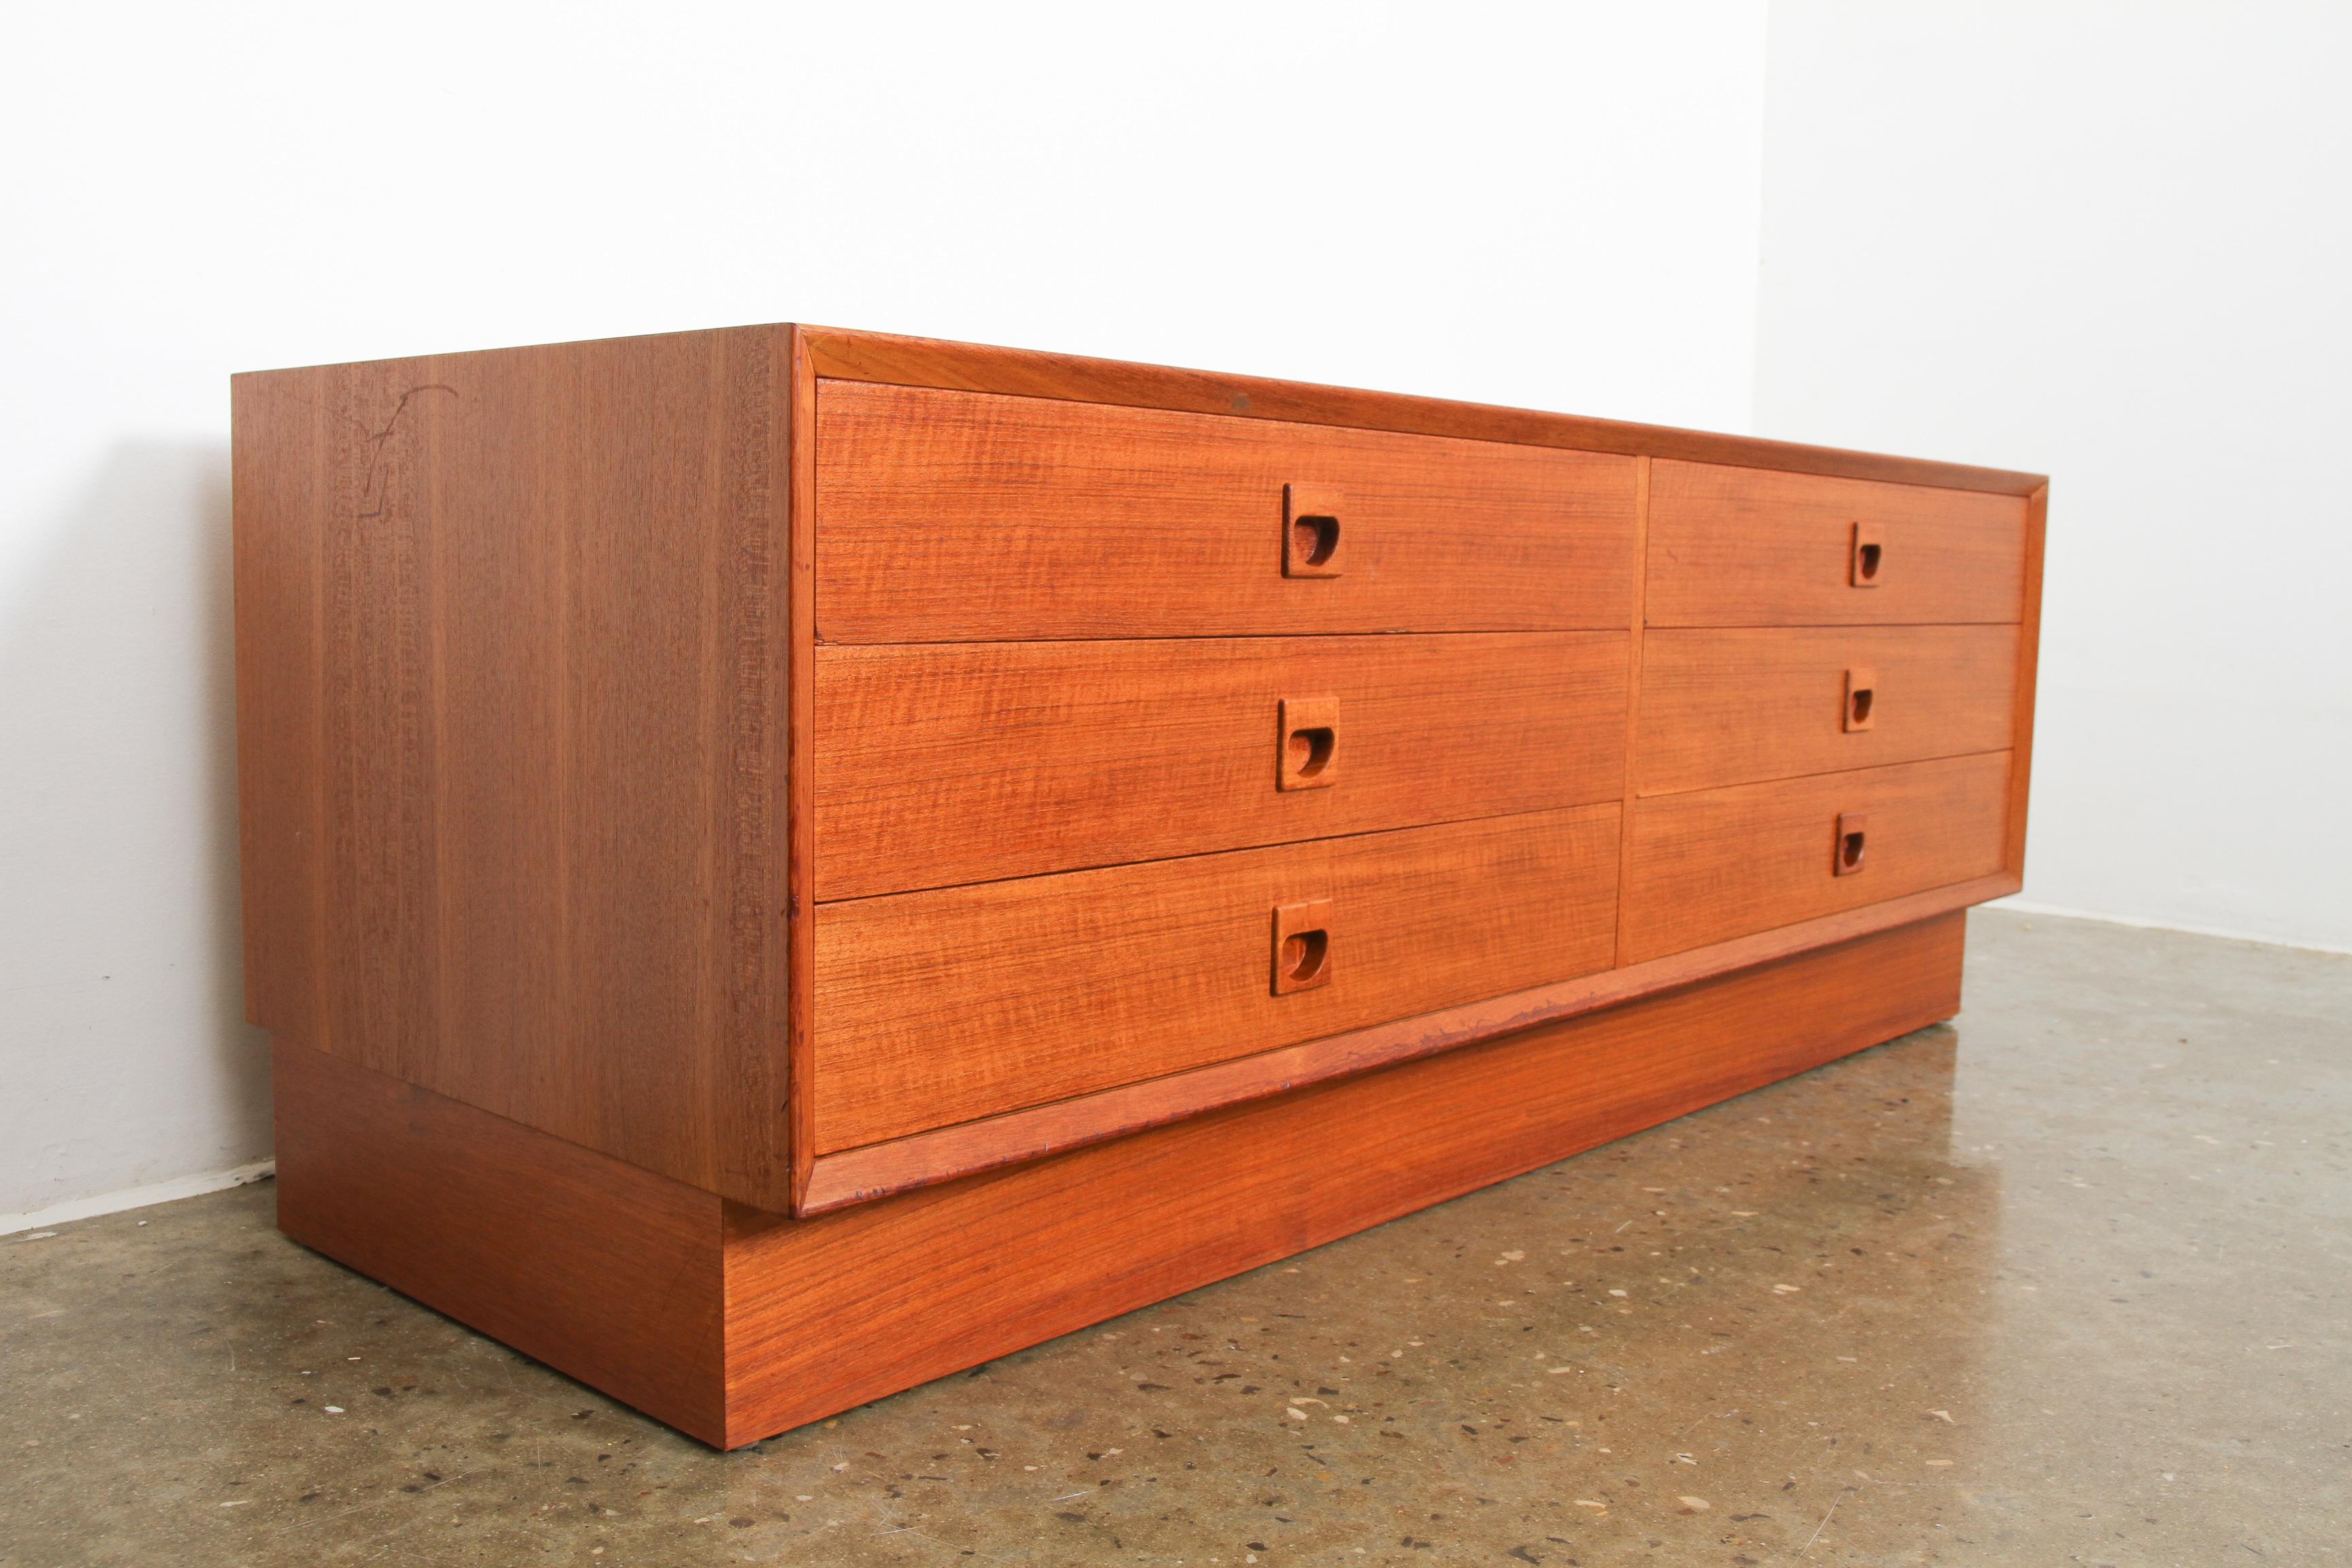 This low and wide Danish midcentury chest of drawers features six large drawers and sits on a frame. It can support a heavy TV, in the hallway as a bench or as a sideboard. Loads of storage space. Beautiful teak veneer and elegant grips in solid